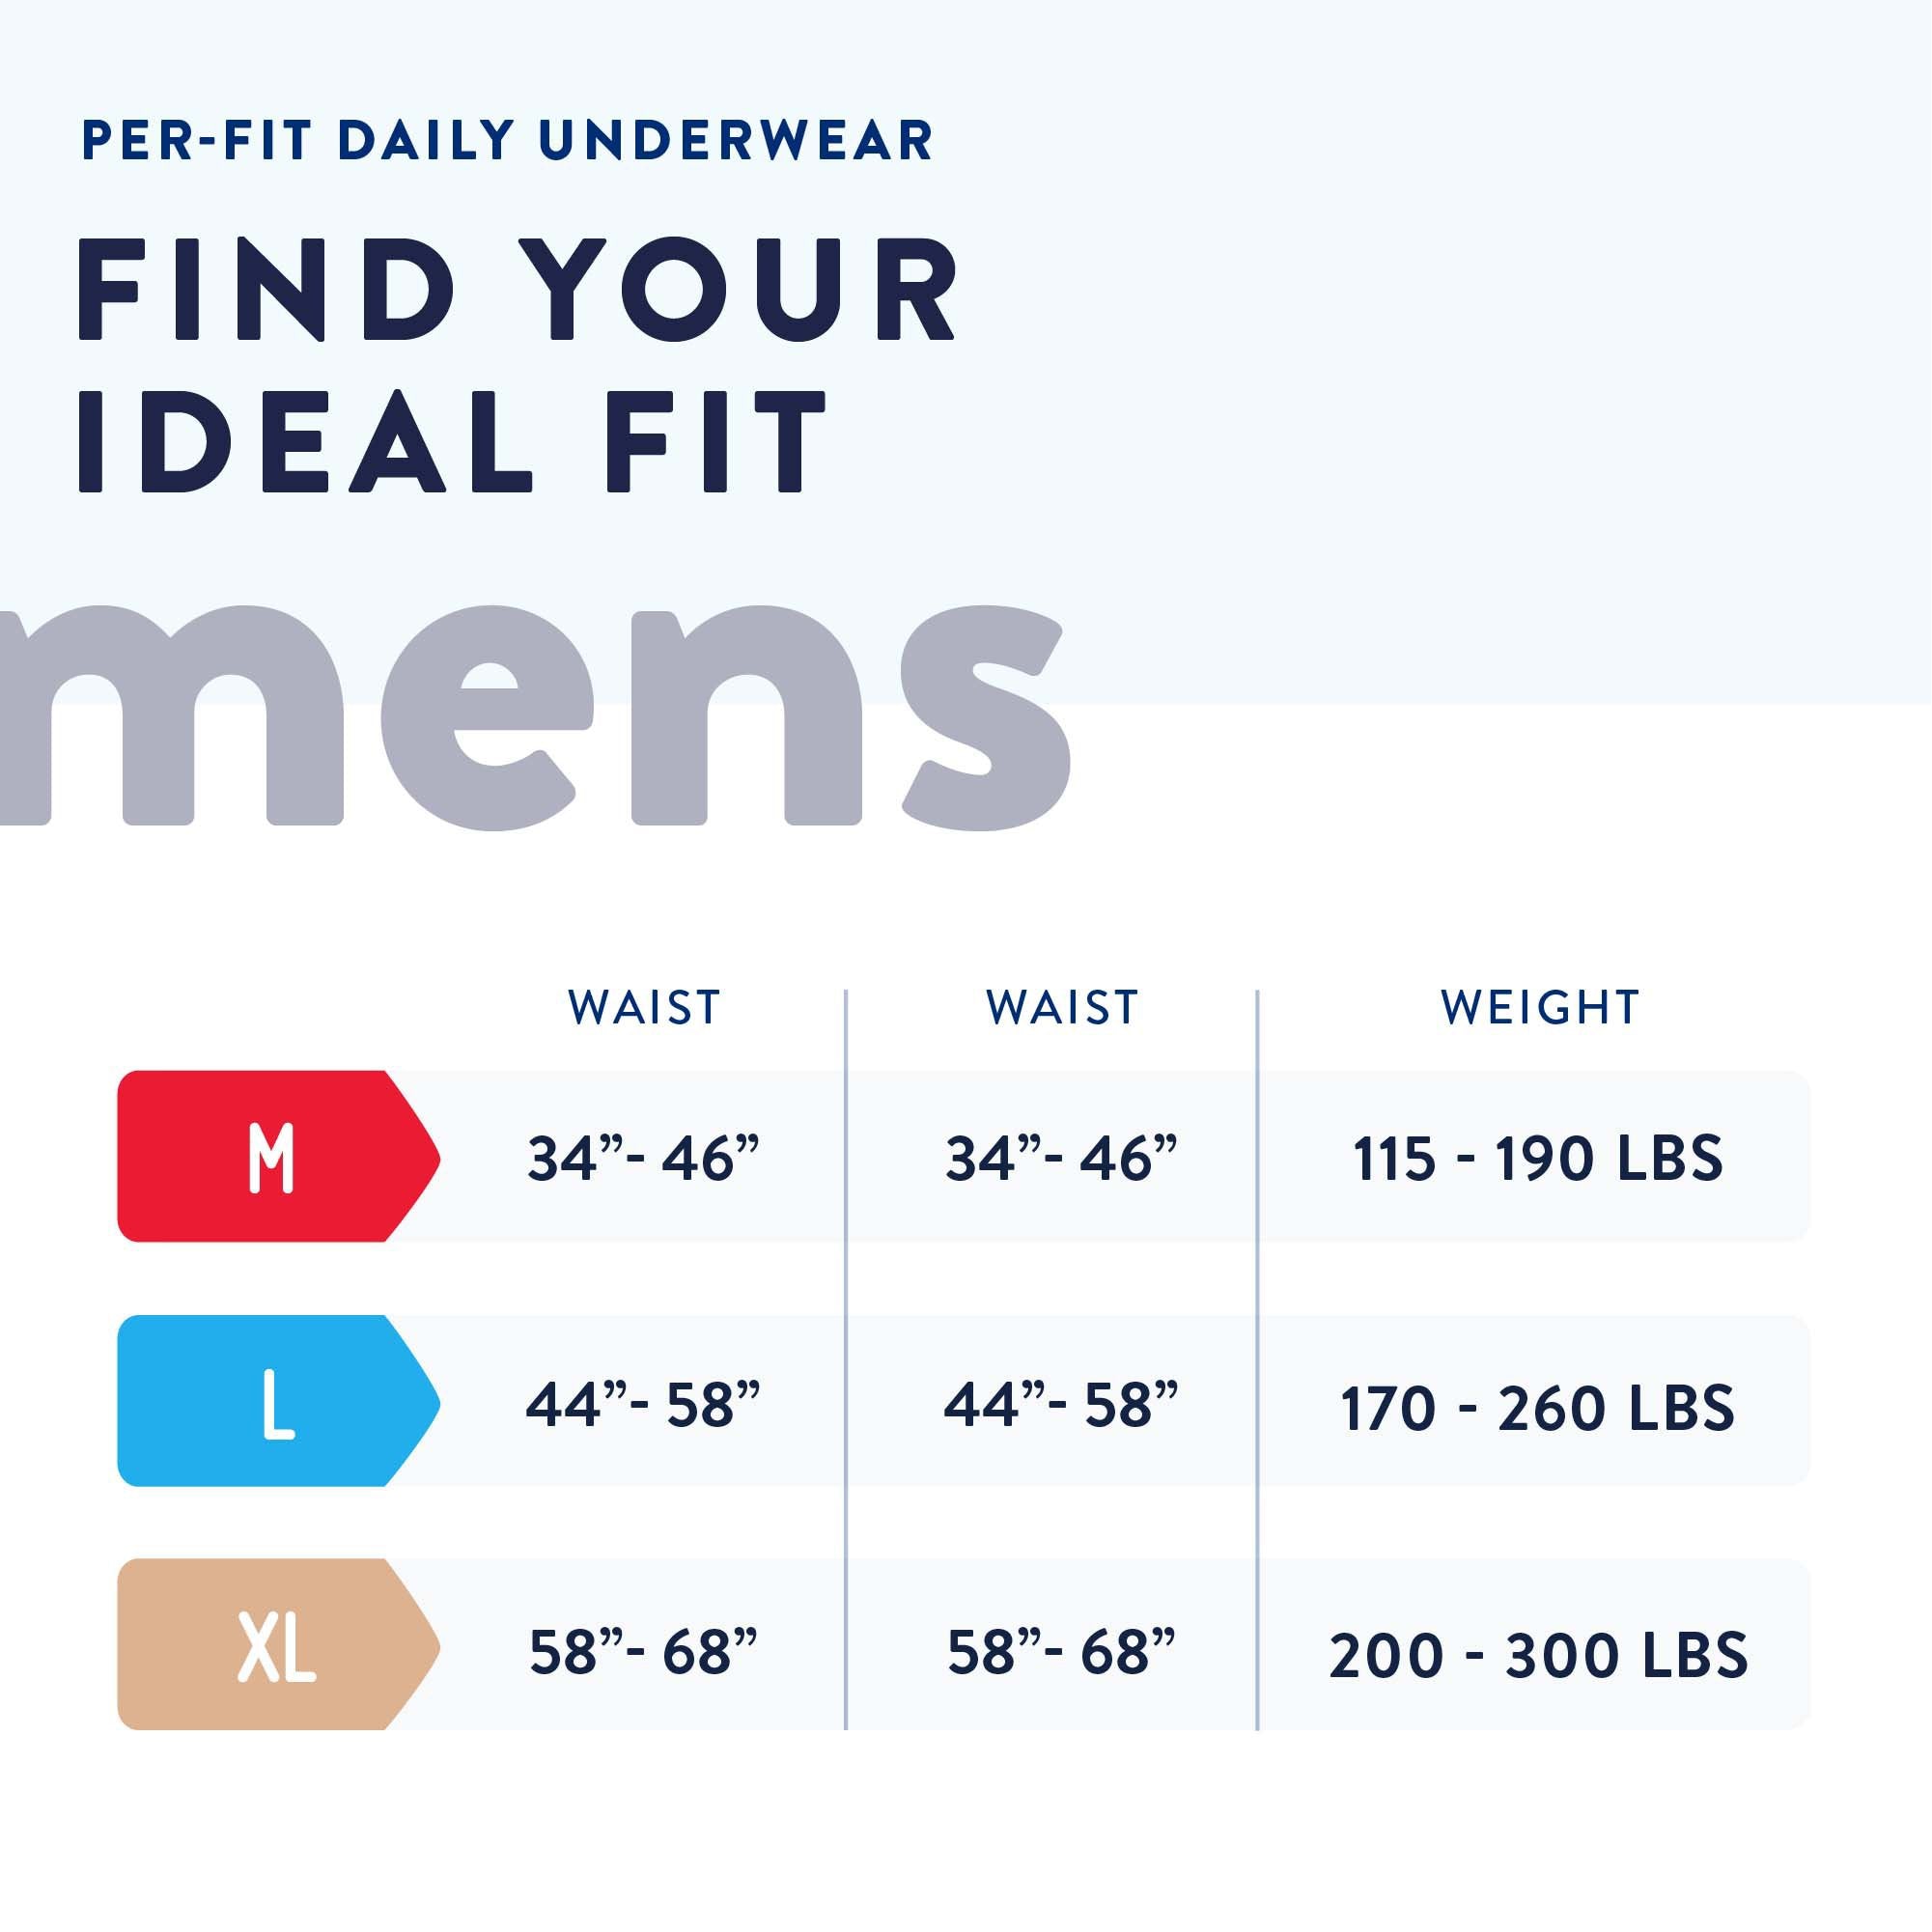 Male Adult Absorbent Underwear Prevail Per-Fit Men Pull On with Tear Away Seams Medium Disposable Moderate Absorbency